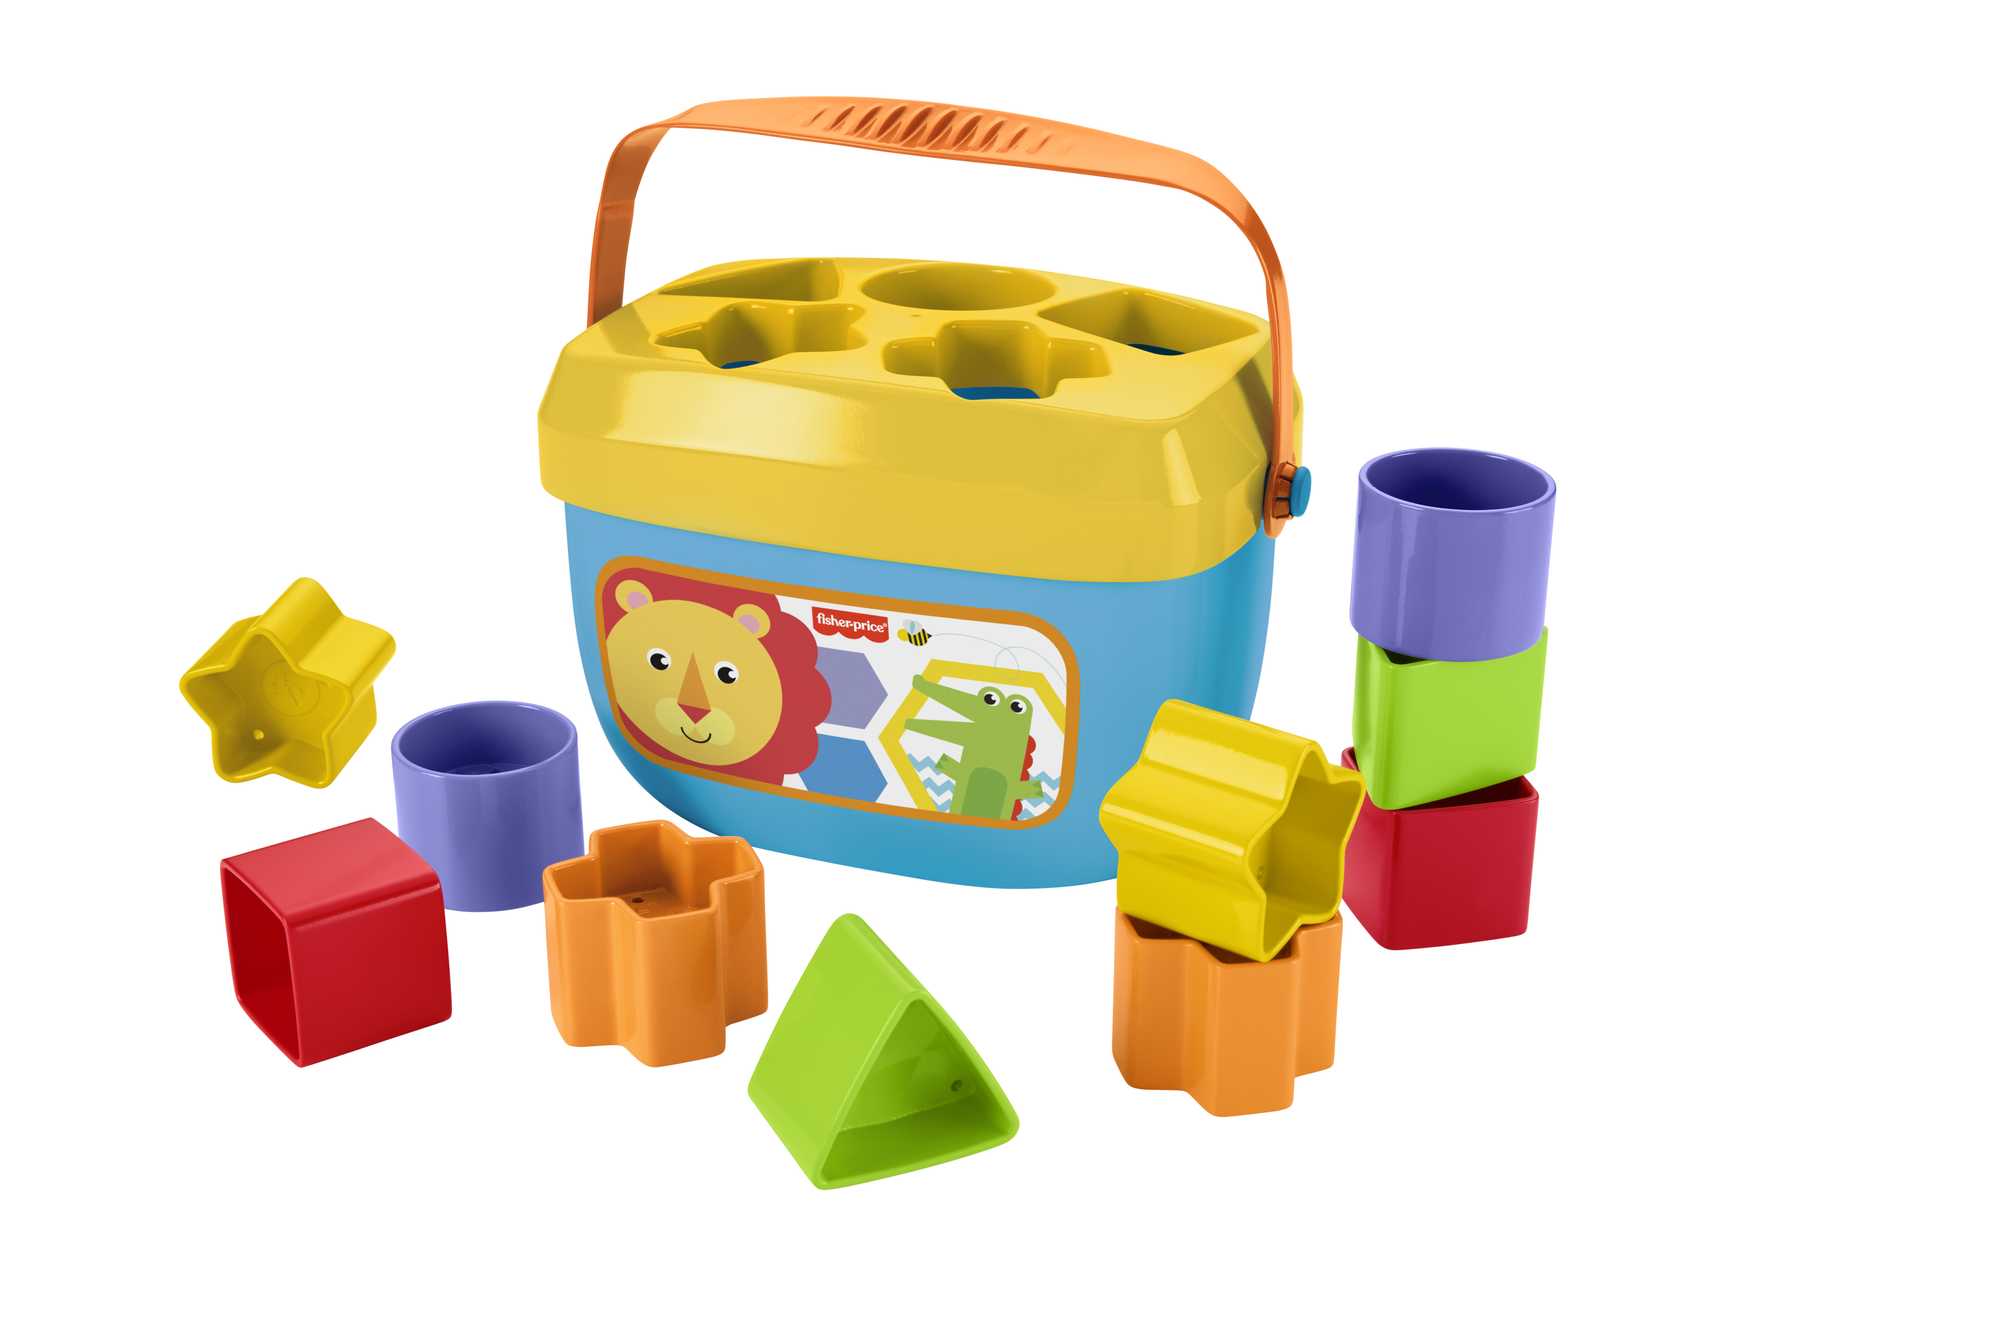 Fisher-Price Baby’s First Blocks Shape Sorting Toy with Storage Bucket, 12 Pieces - image 1 of 7